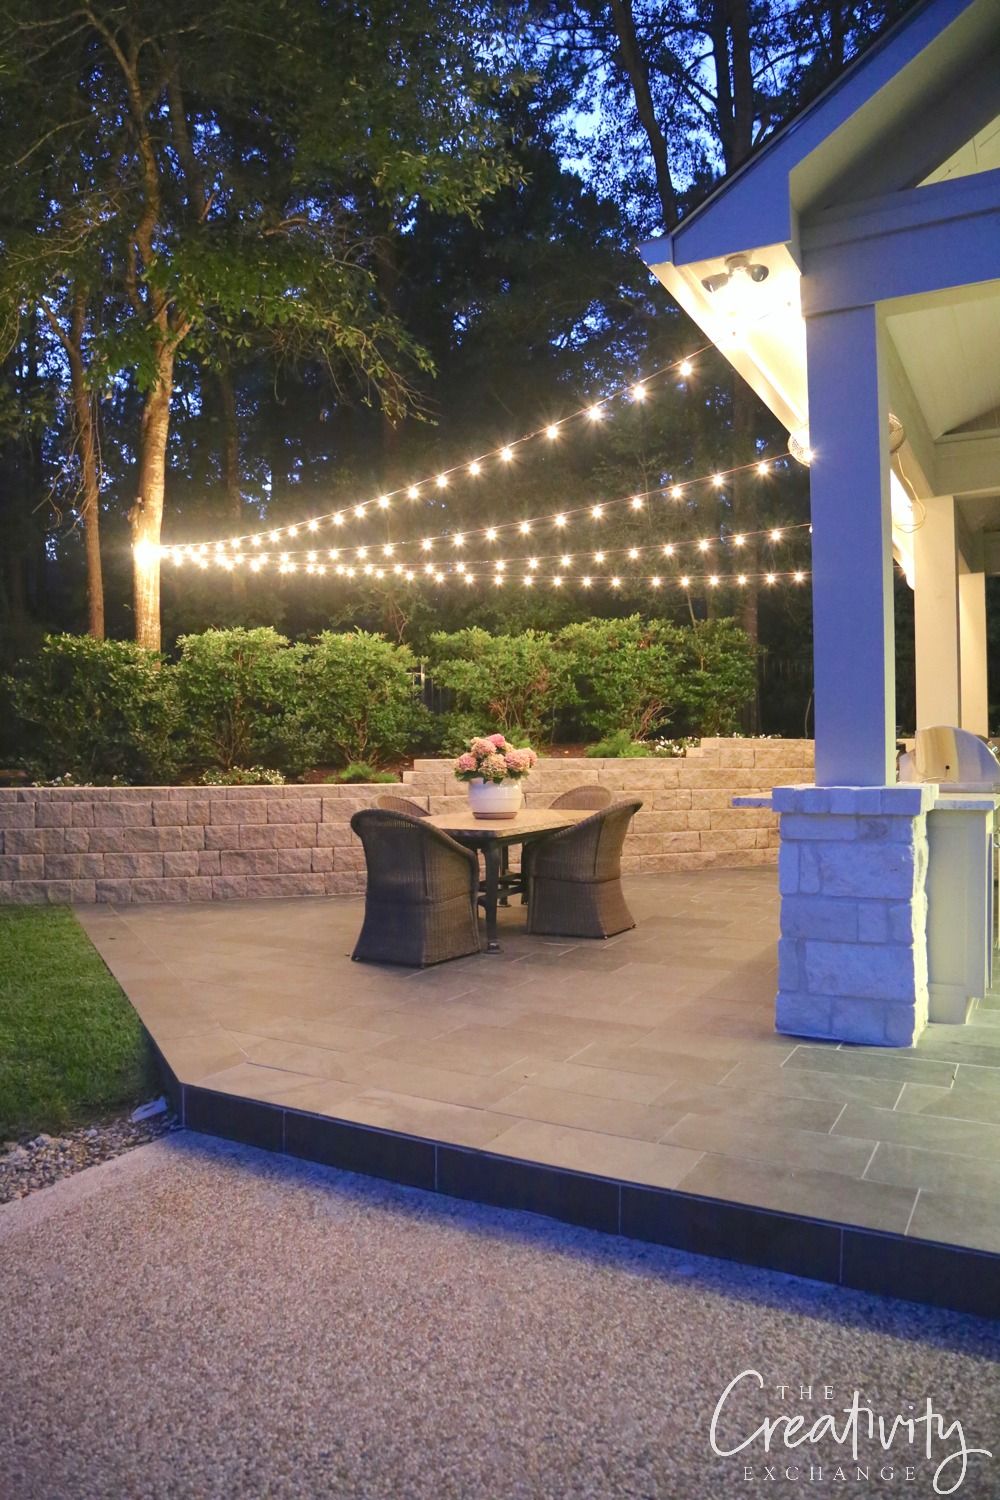 The Best Lighting Ideas for Summer Patio
and Yard